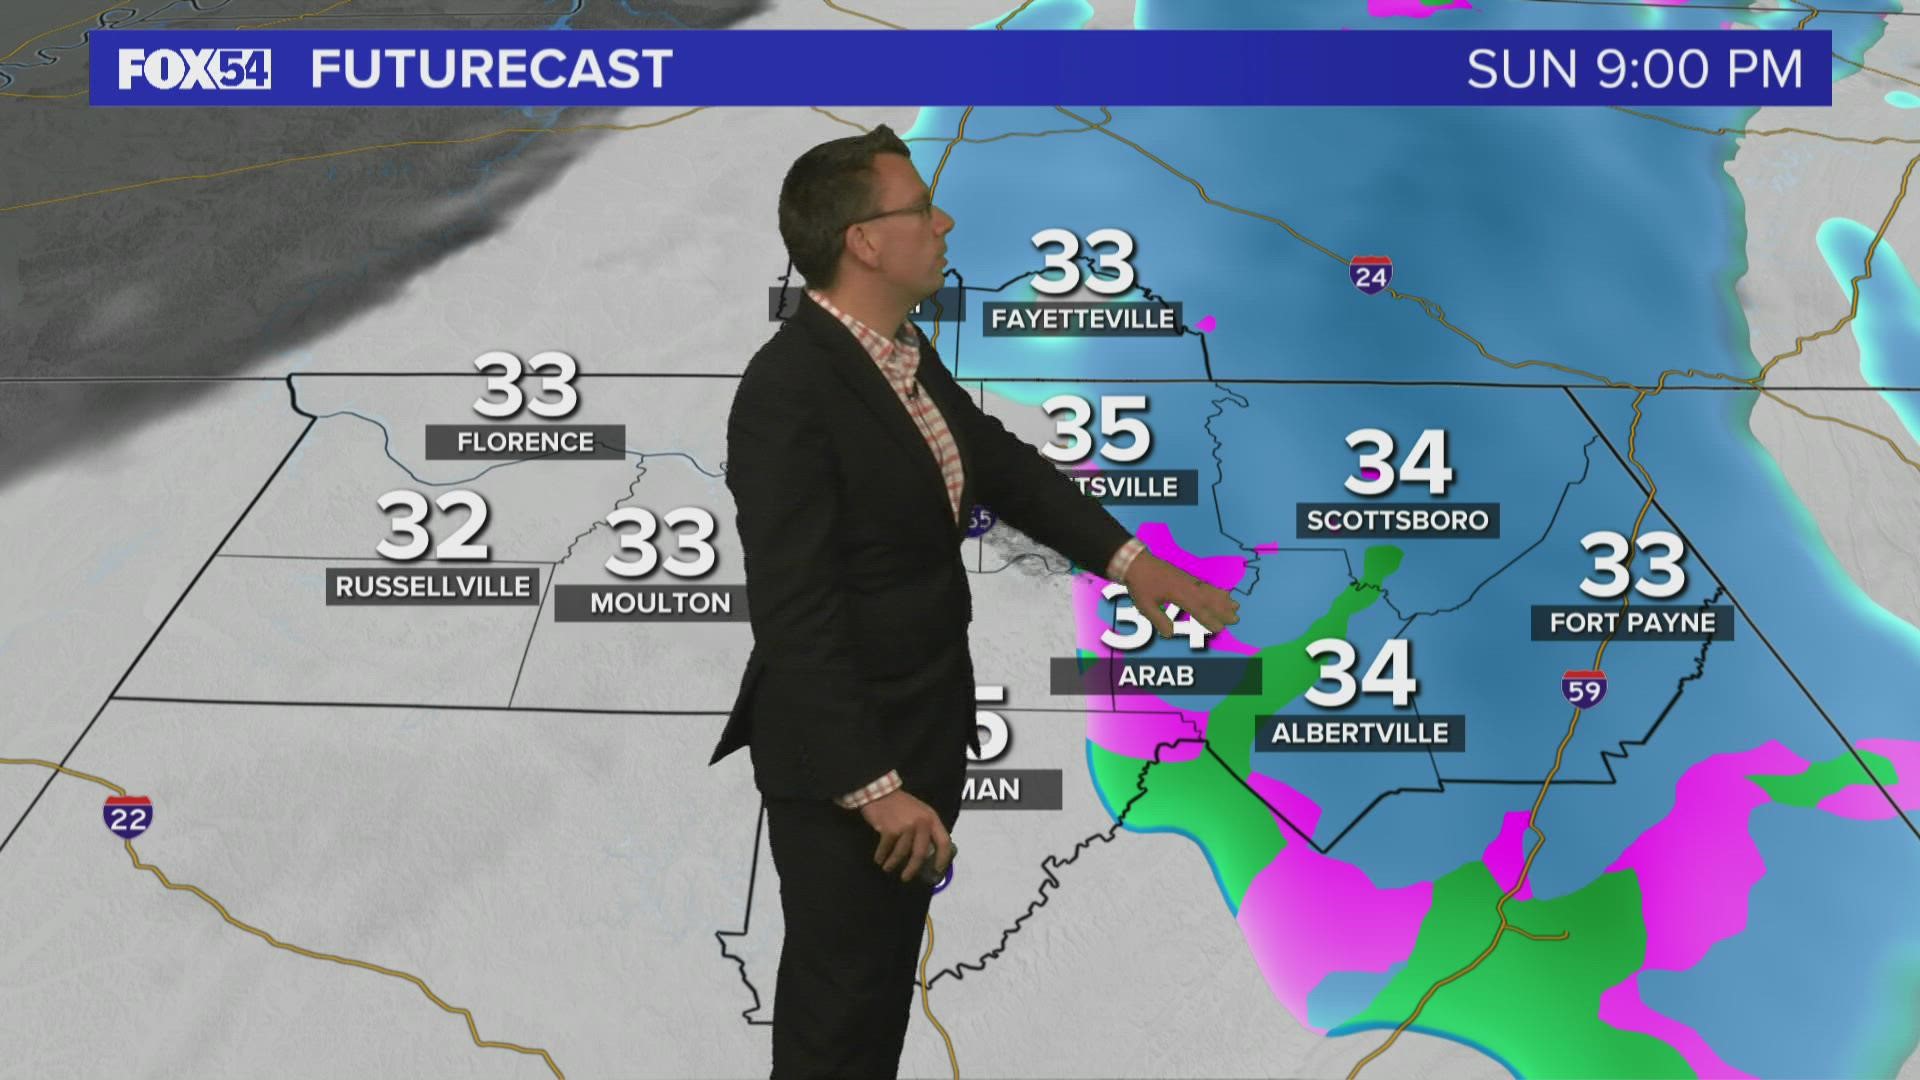 There's an opportunity for Winter Weather this weekend across the Tennessee Valley.